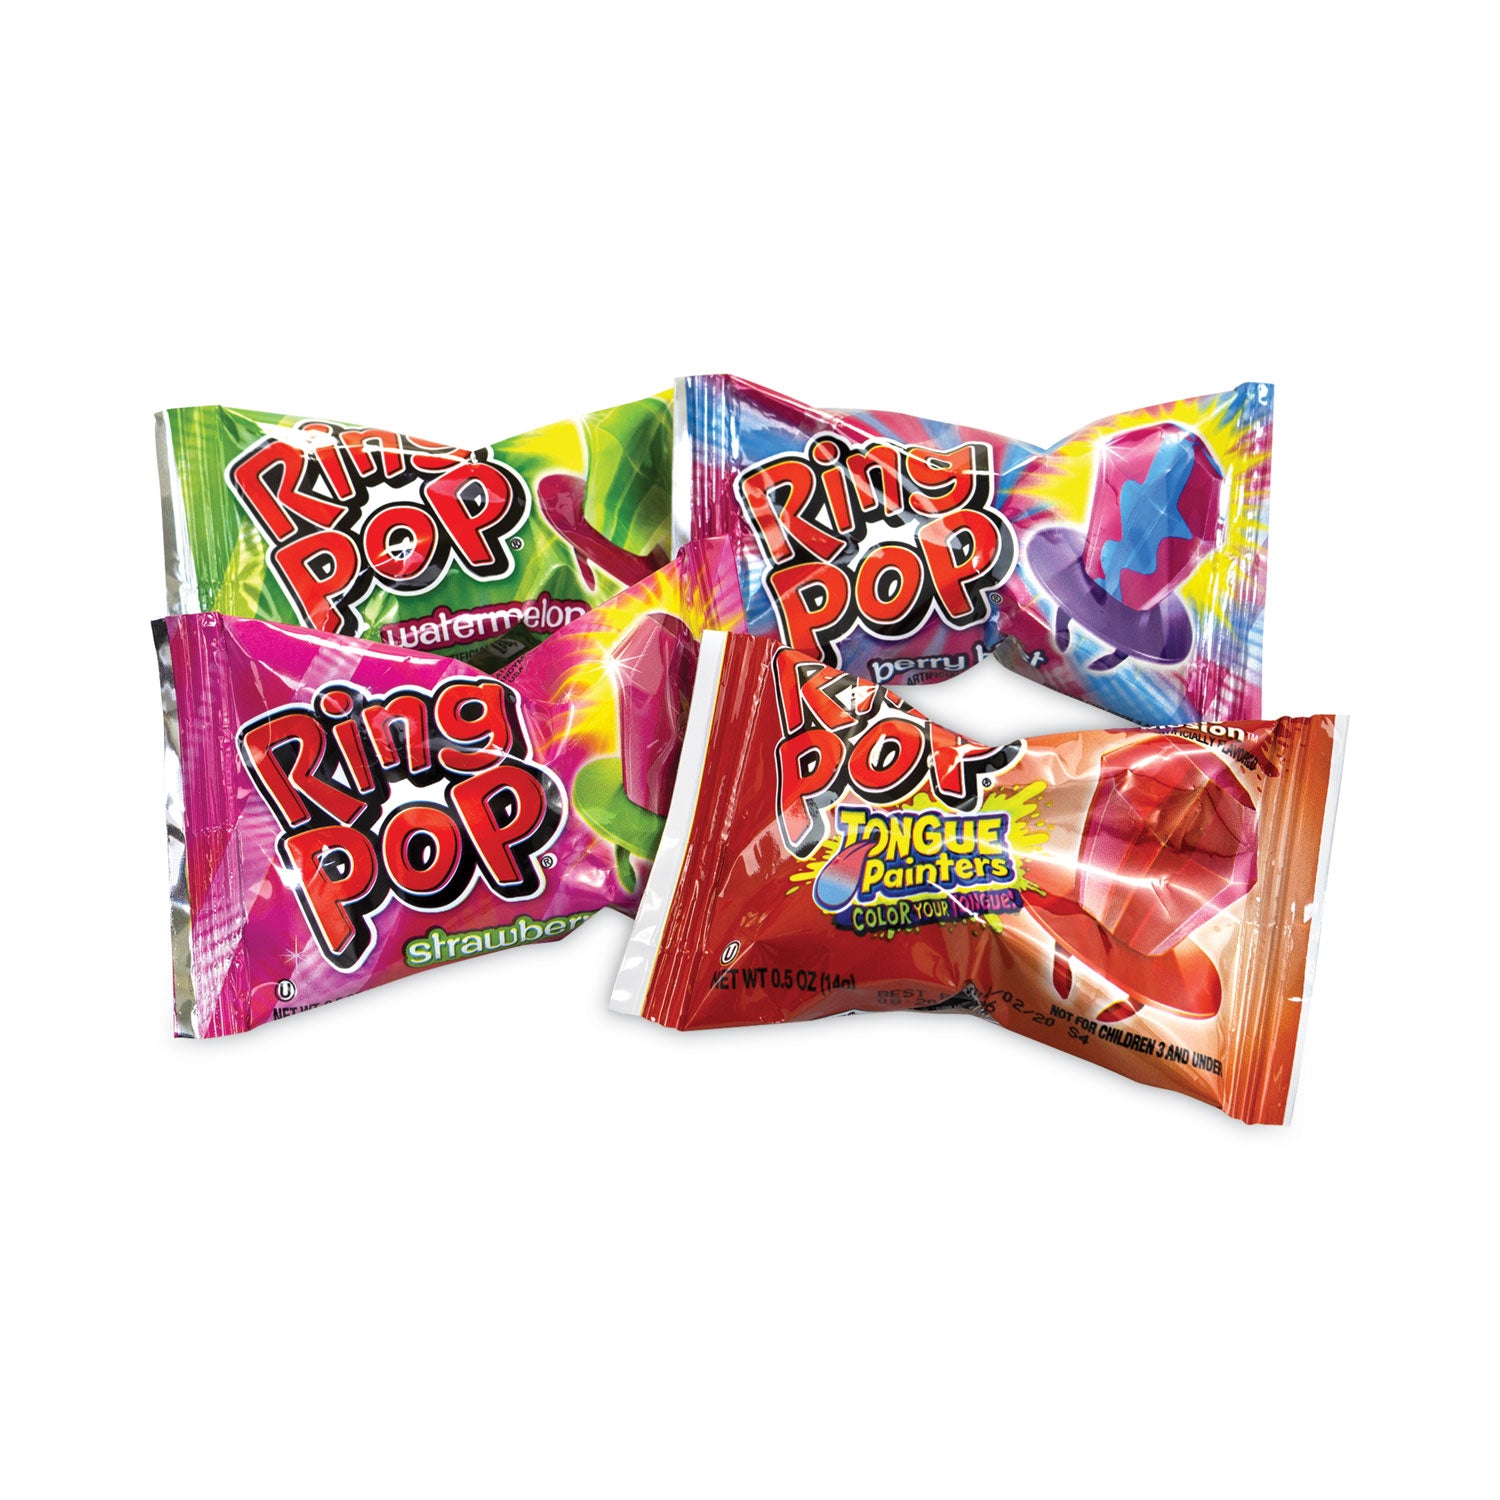 ring-pop-lollipops-assorted-flavors-05-oz-40-piece-tub-ships-in-1-3-business-days_grr22000013 - 1